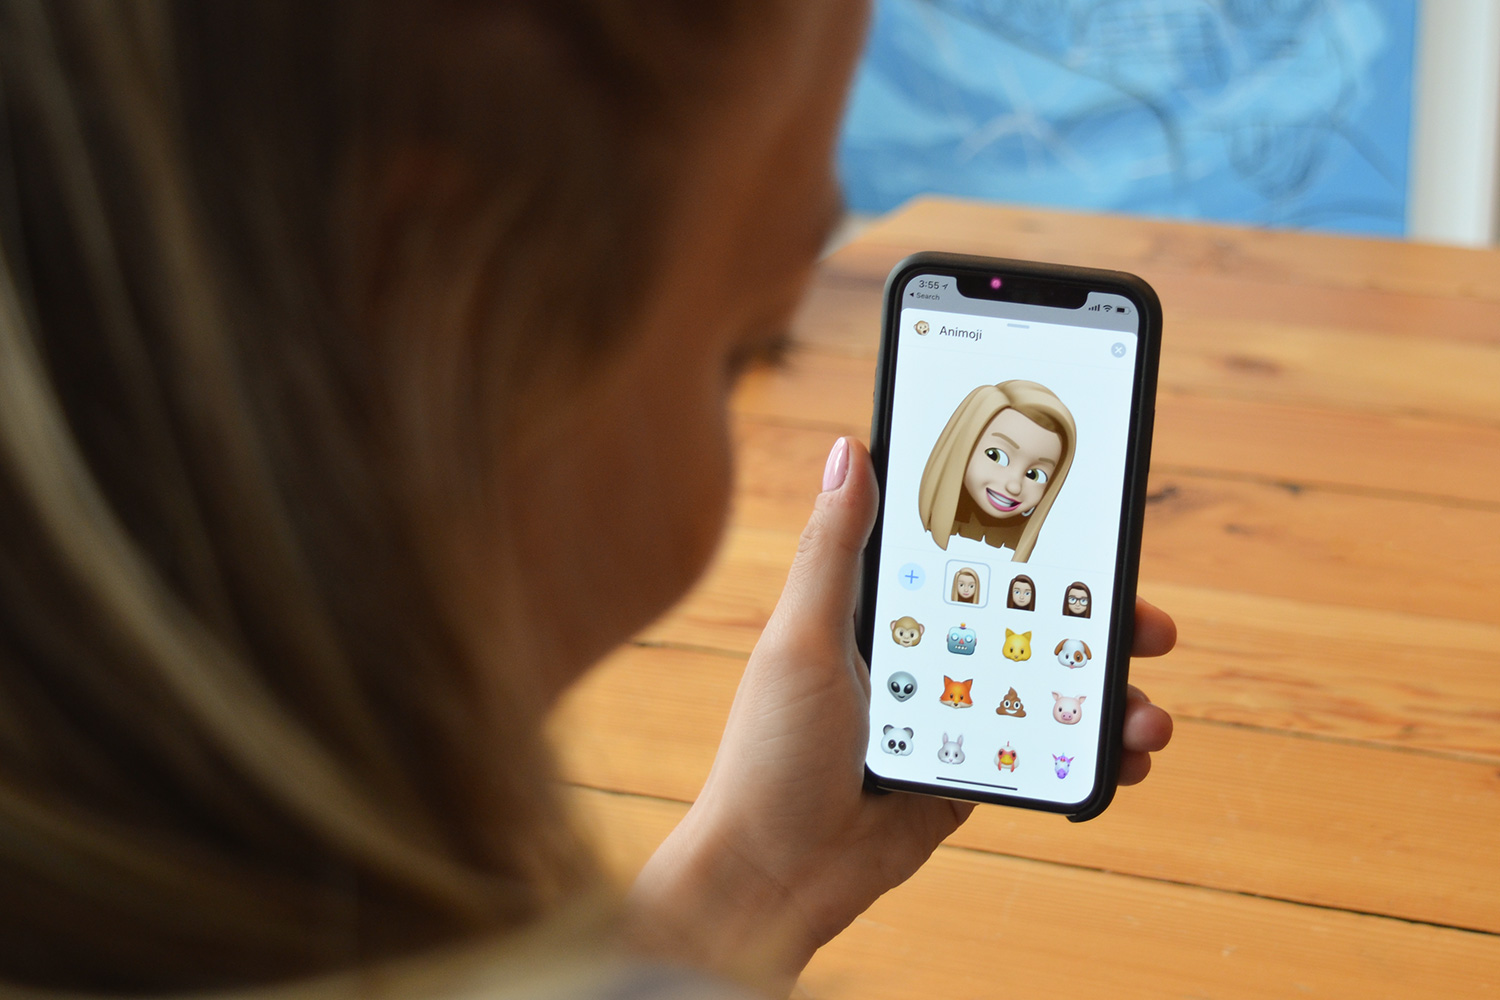 How to Create, Customize, and Use Memoji in Apple’s iOS | Digital Trends